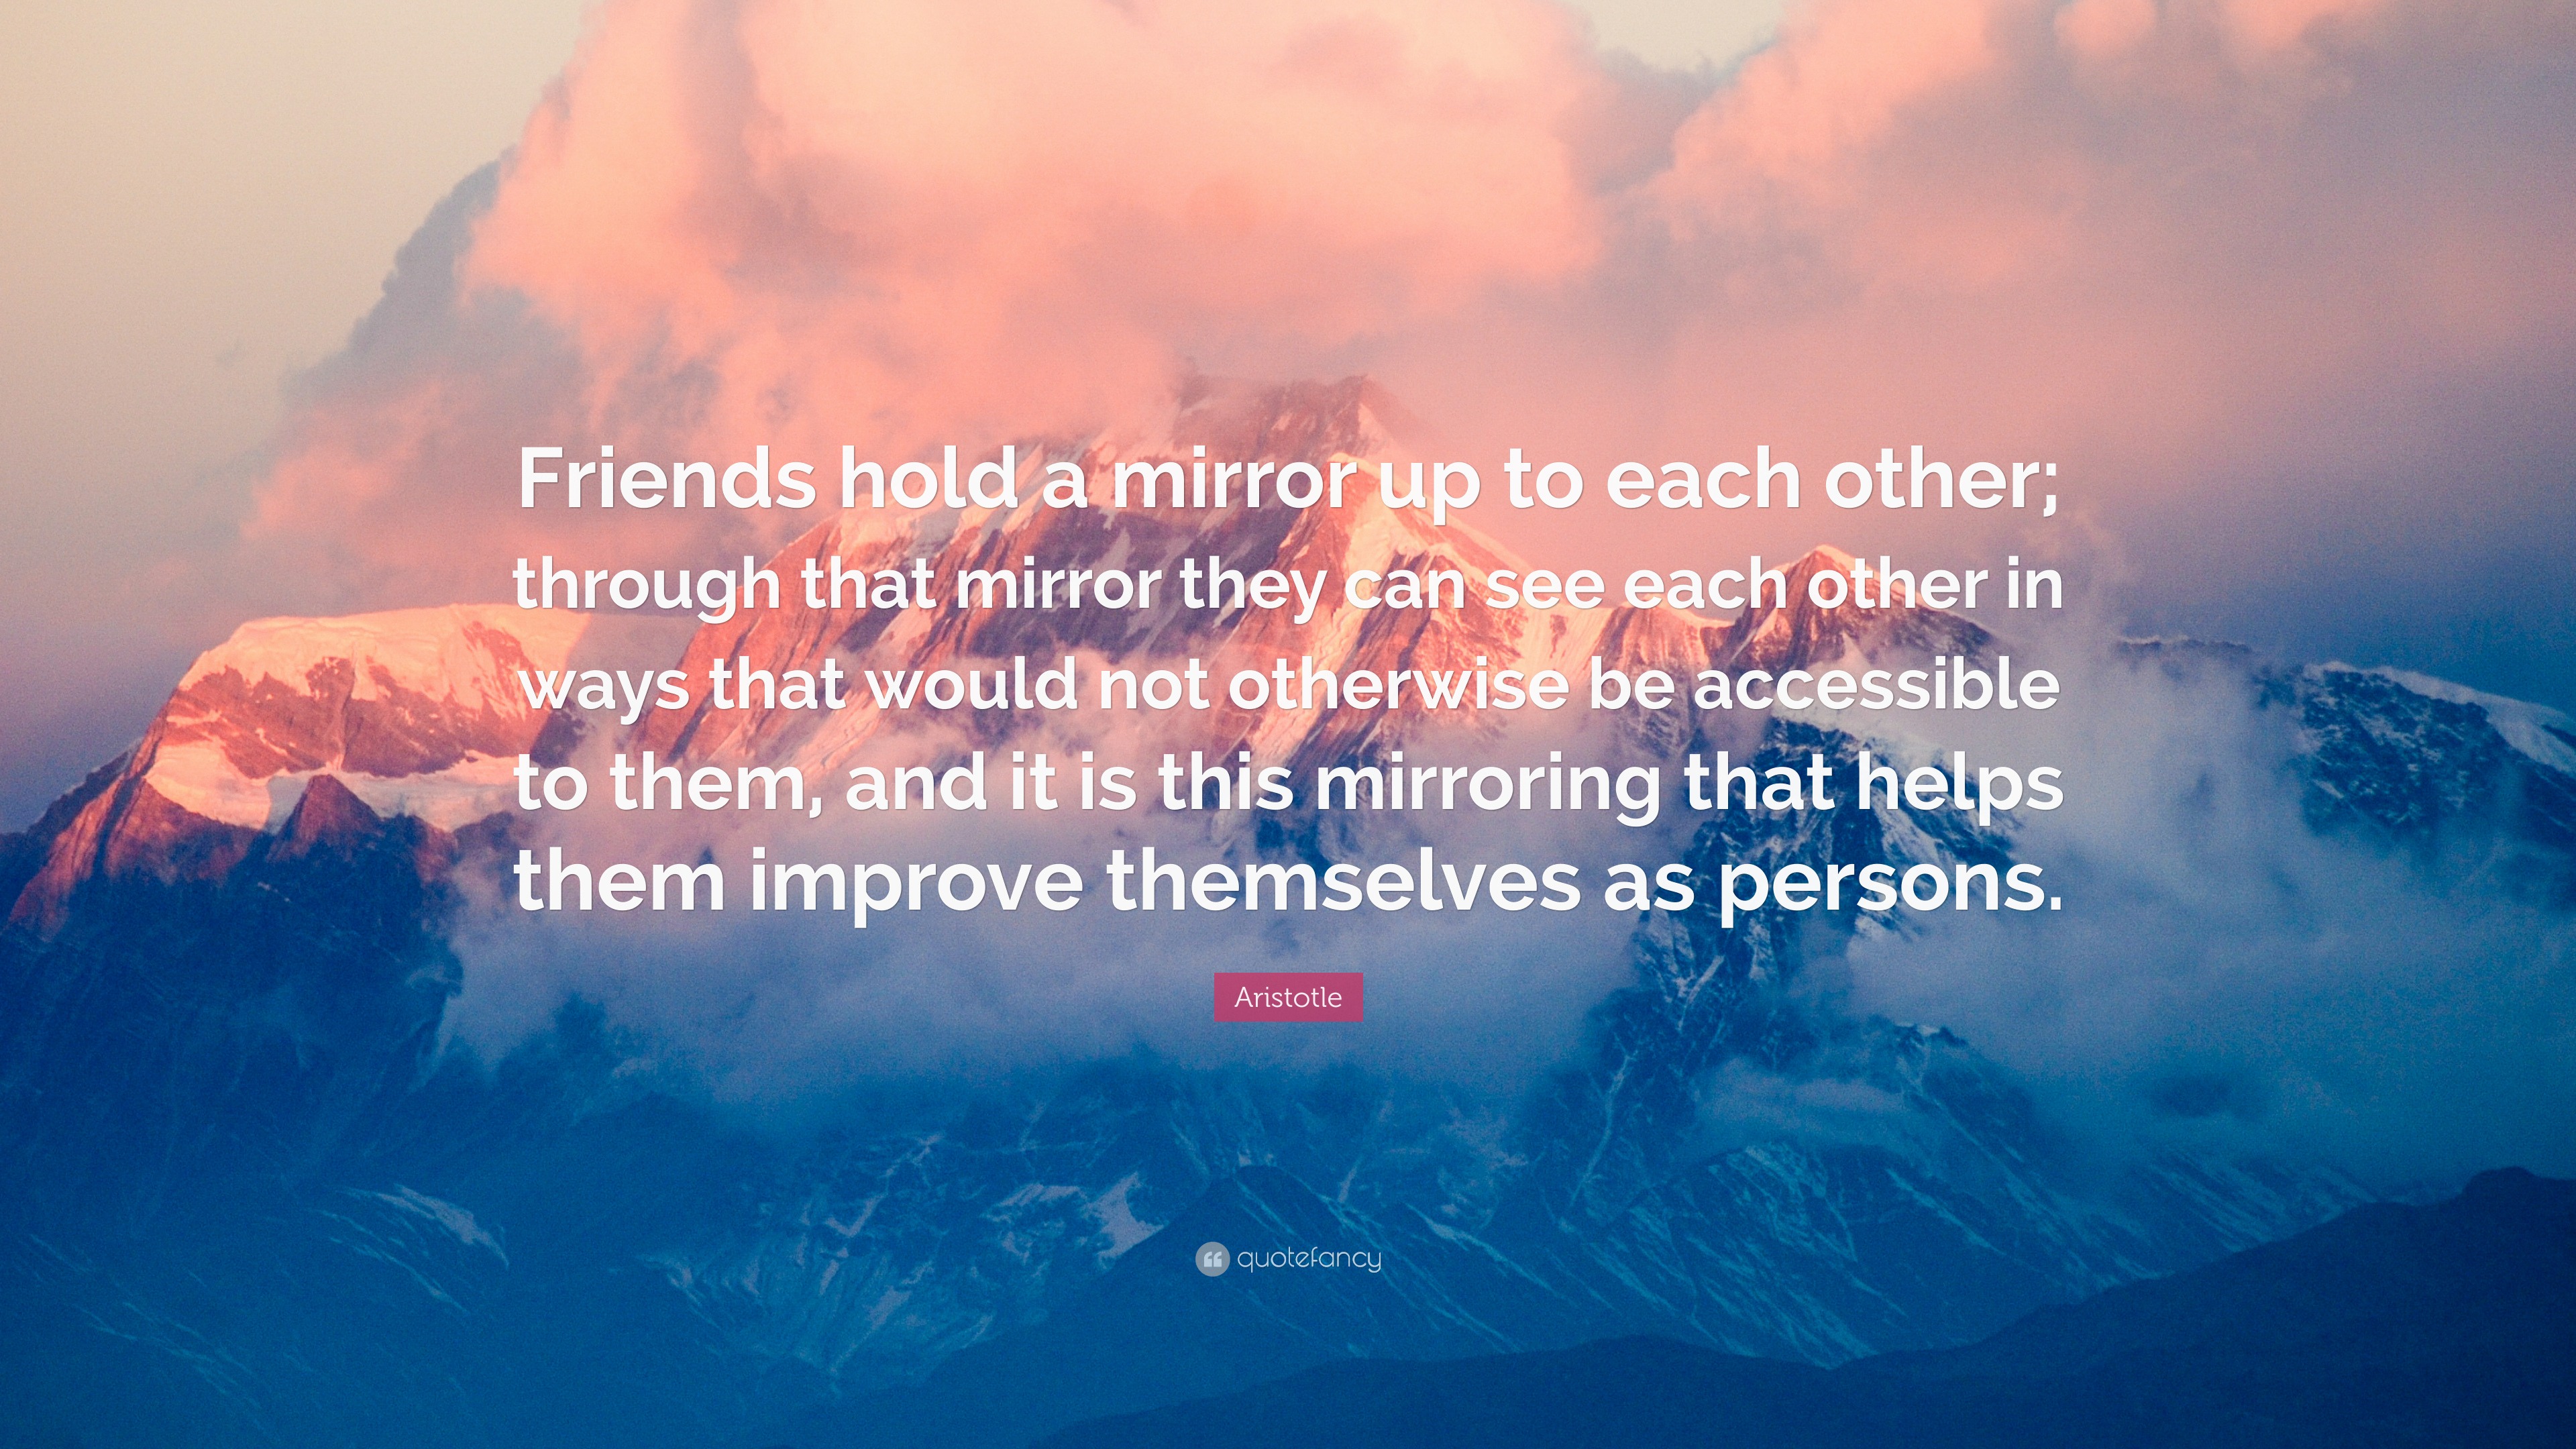 Aristotle Quote: “Friends hold a mirror up to each other; through that ...